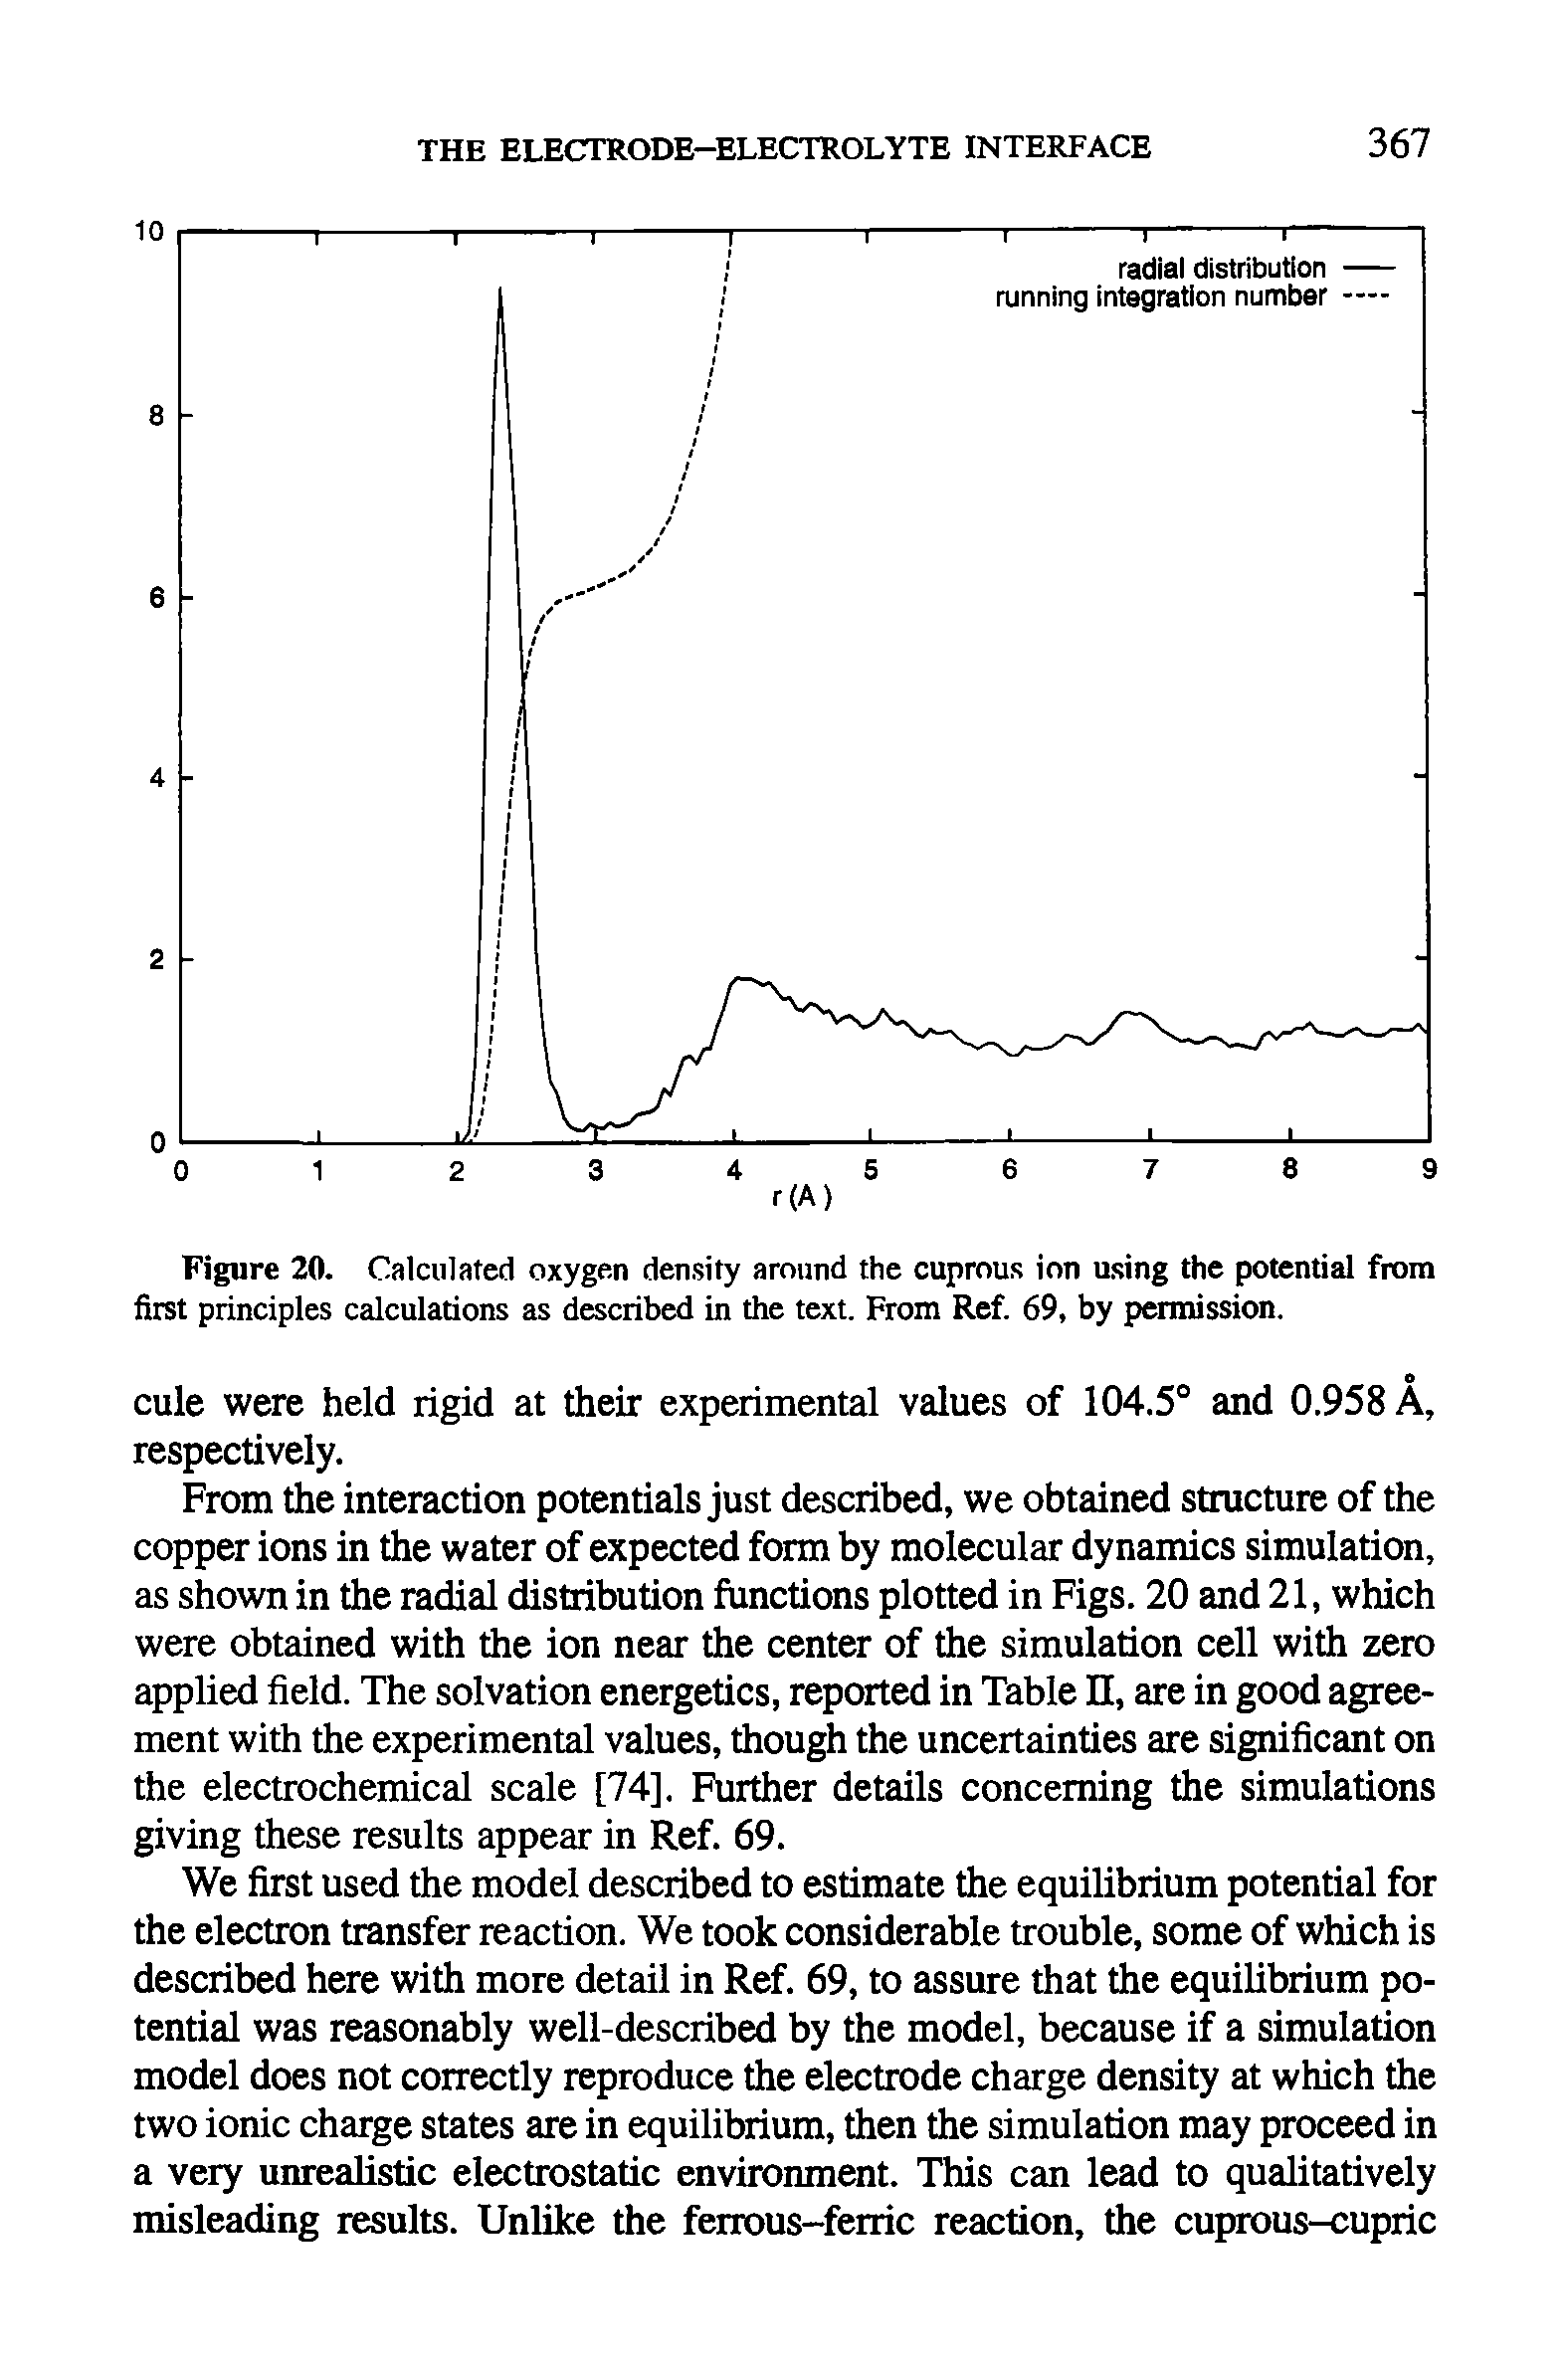 Figure 20. Calculated oxygen density around the cuprous ion using the potential from first principles calculations as described in the text. From Ref. 69, by permission.